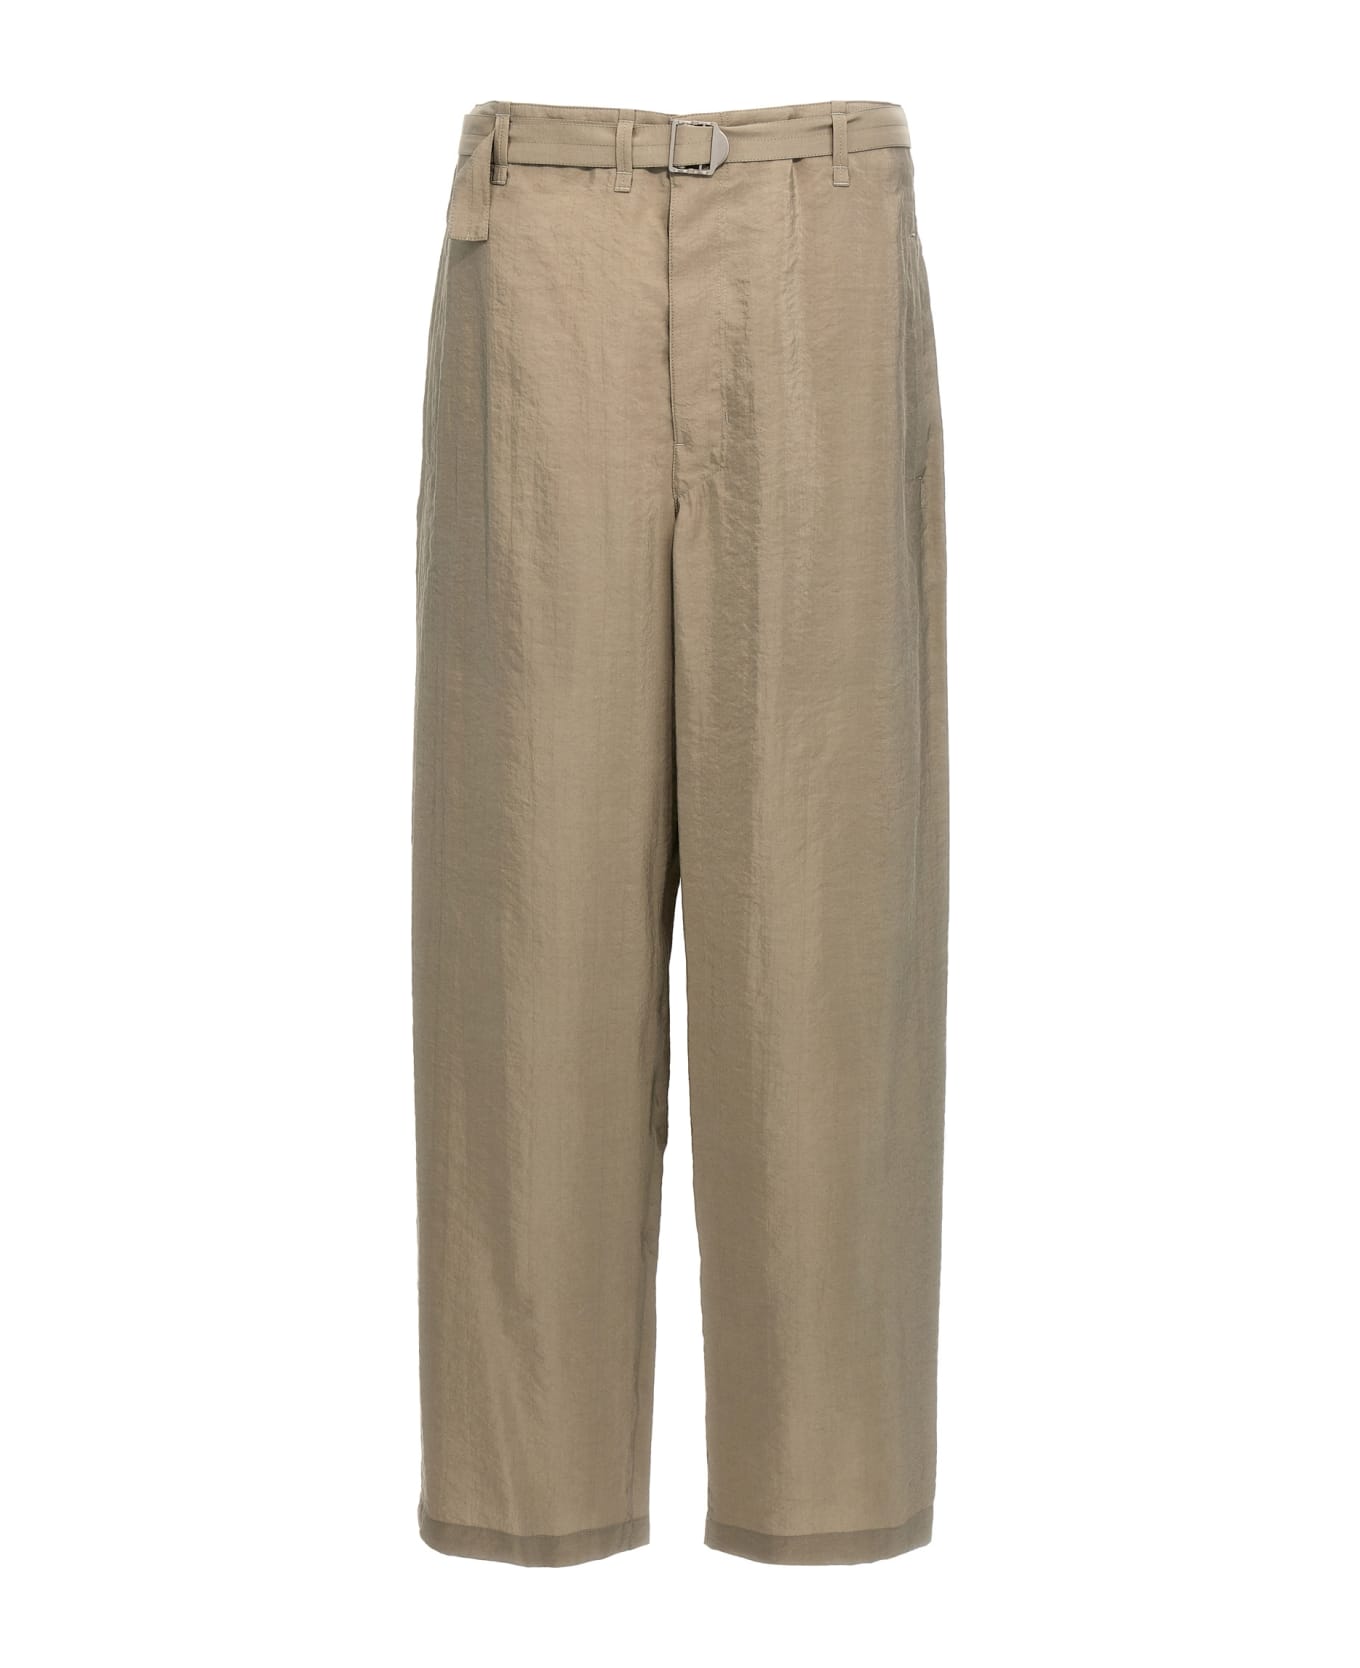 Lemaire 'seamless Belted' Trousers - Gray ボトムス